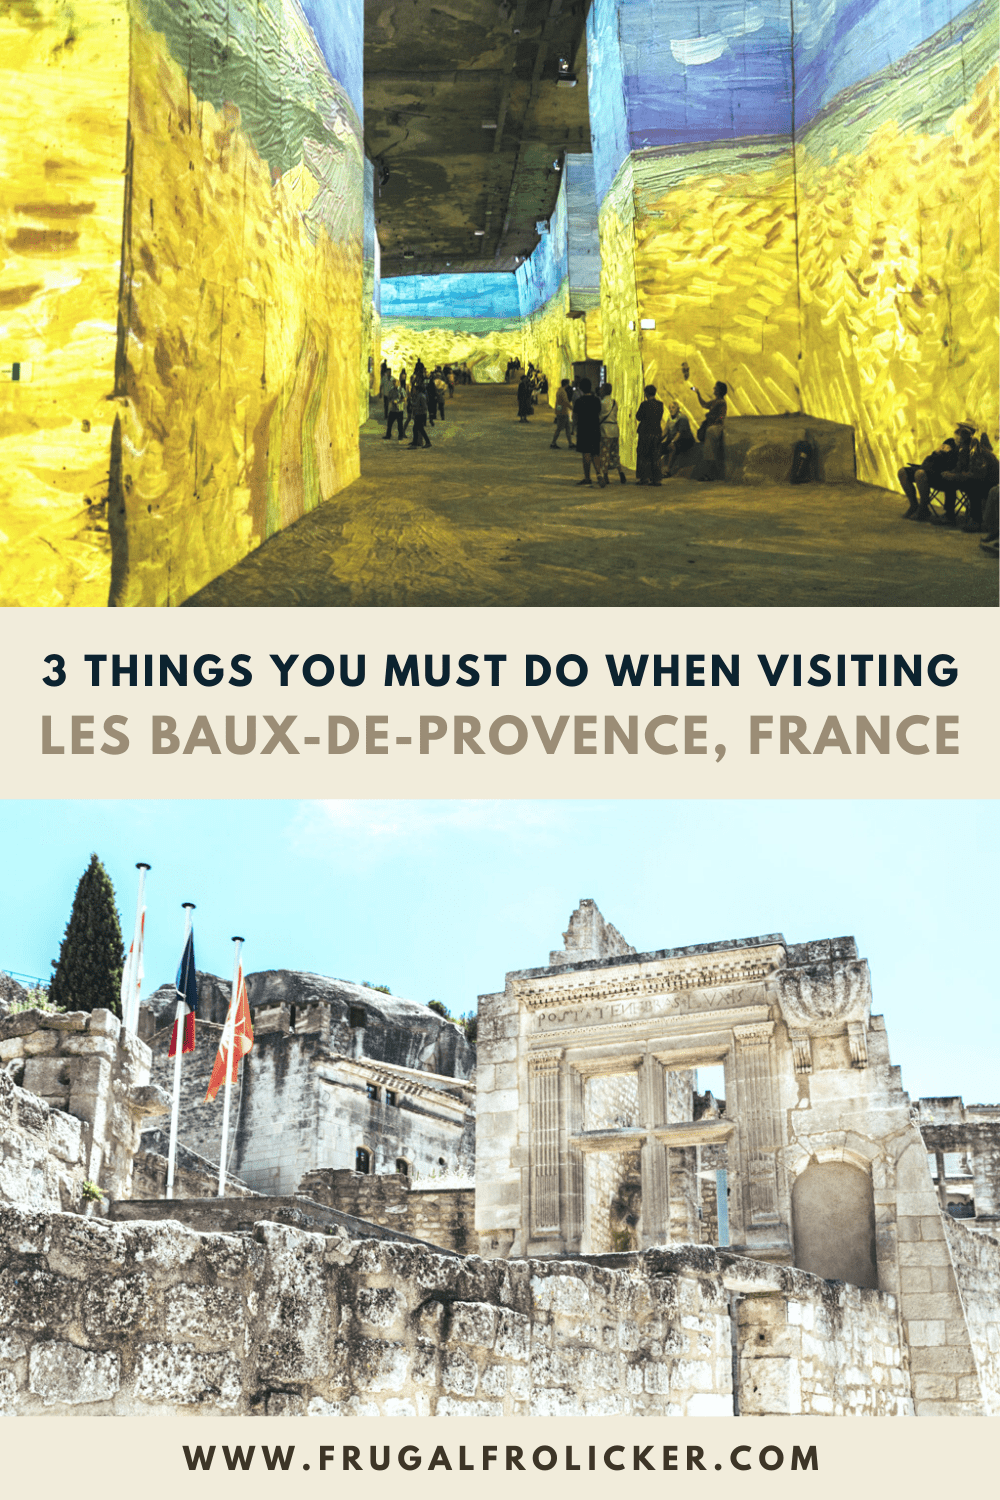 3 Best Things To Do In Les Baux-de-Provence, France